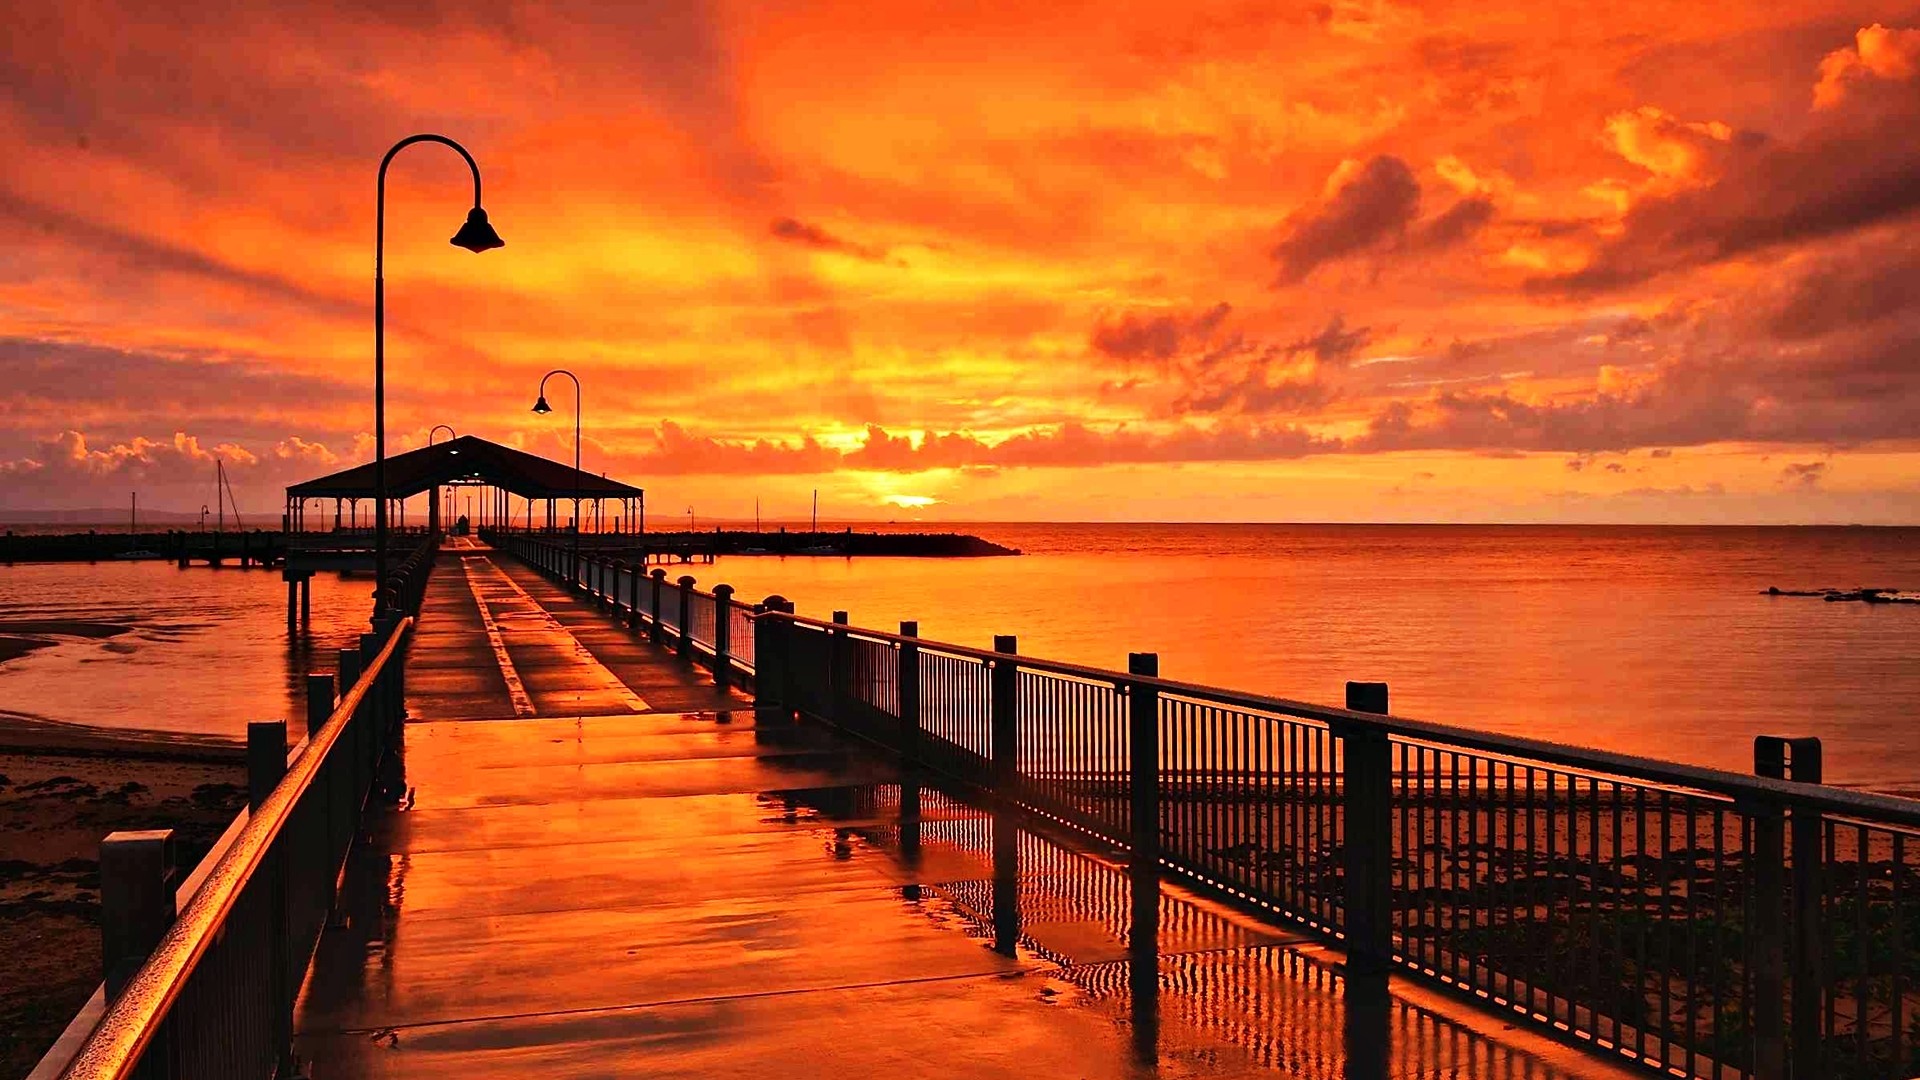 Sunset At Redcliffe Jetty Queensland Australia By David Shipton